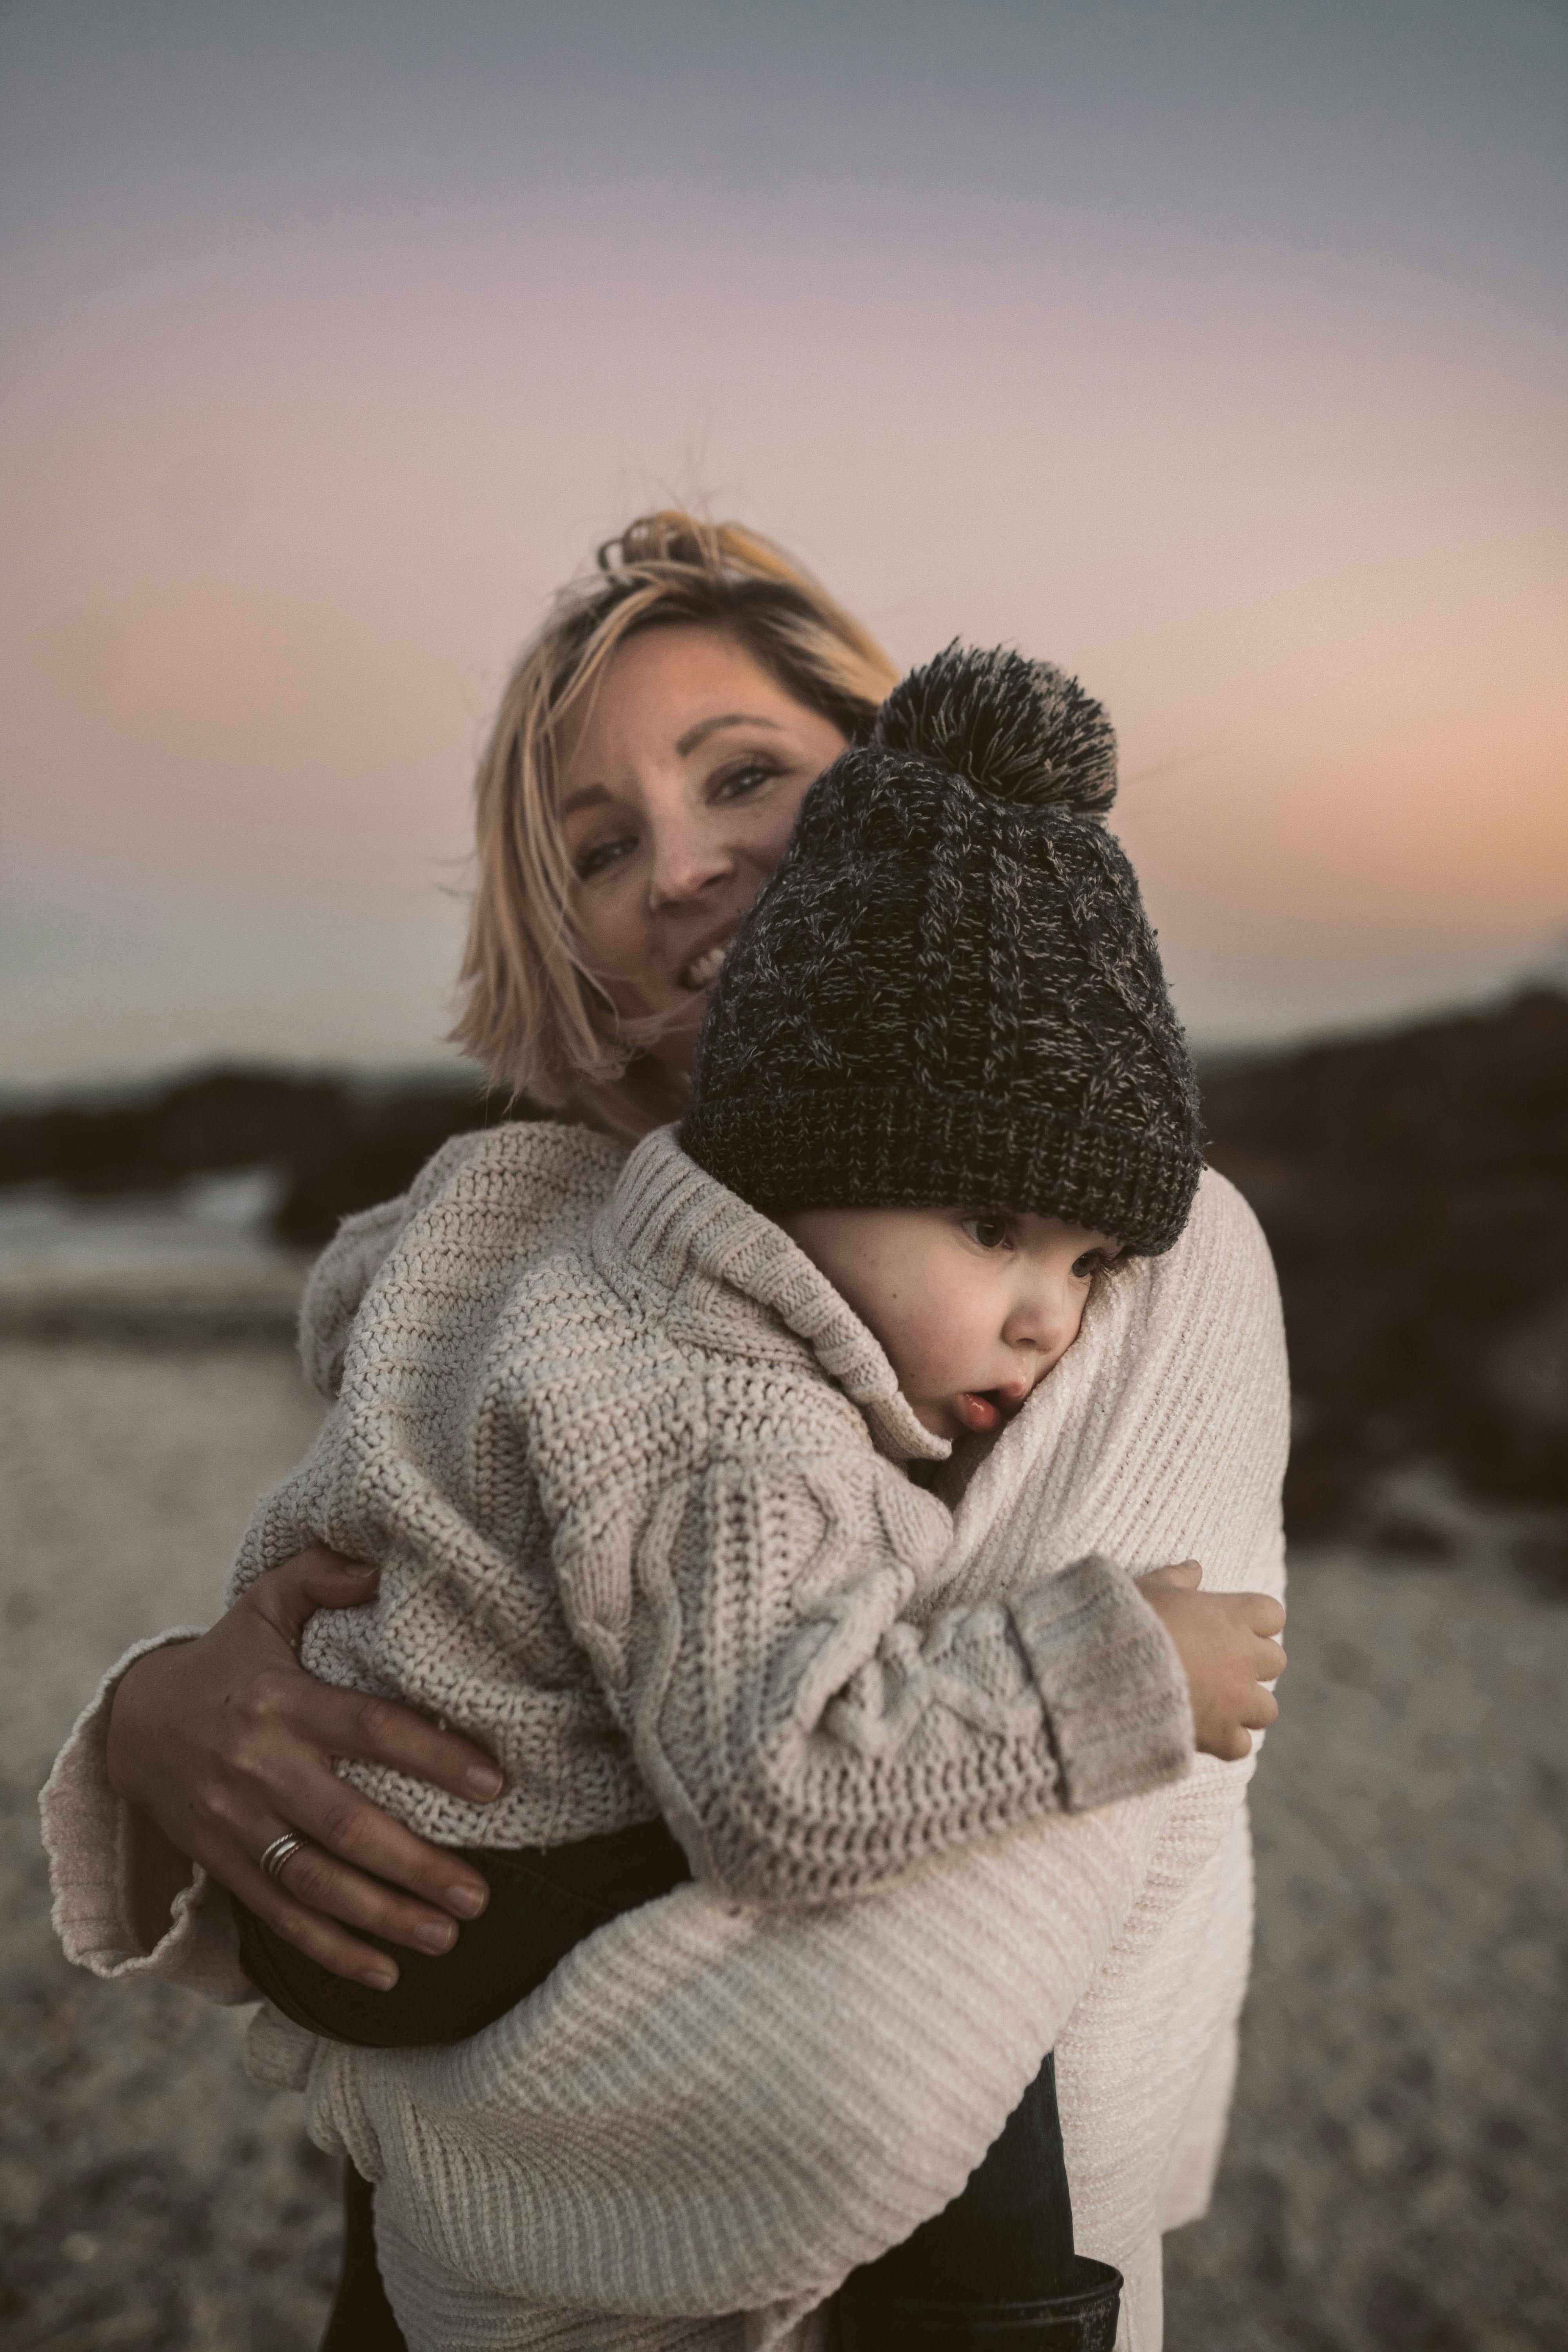 Woman and her baby on the beach | Source: Pexels